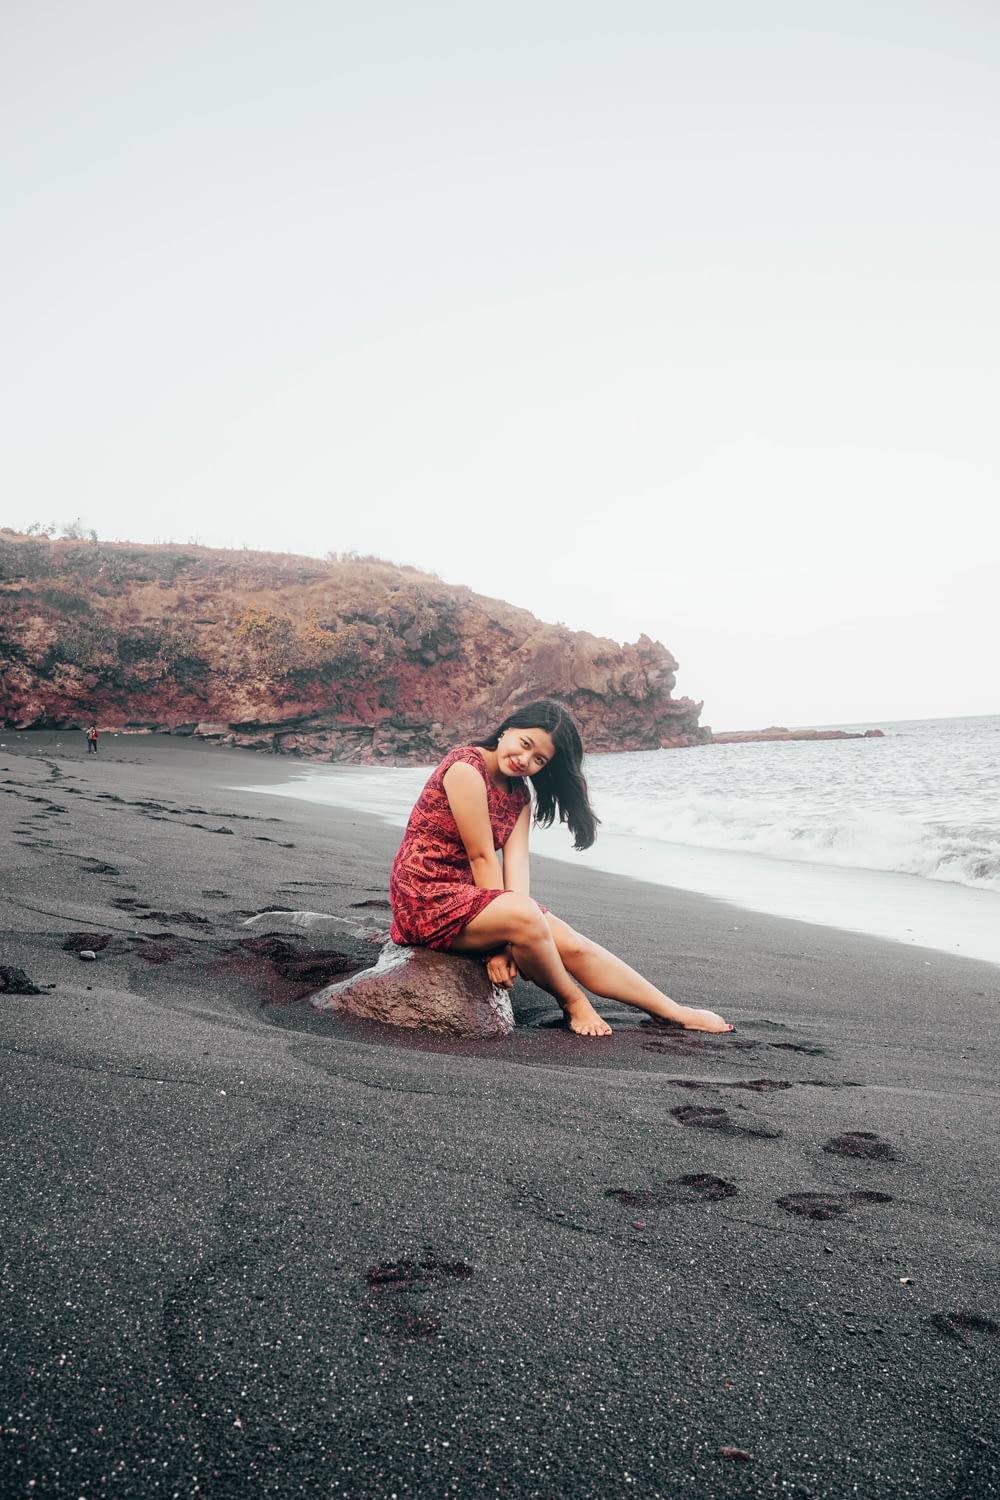 woman in red dress sitting on beach shore during daytime